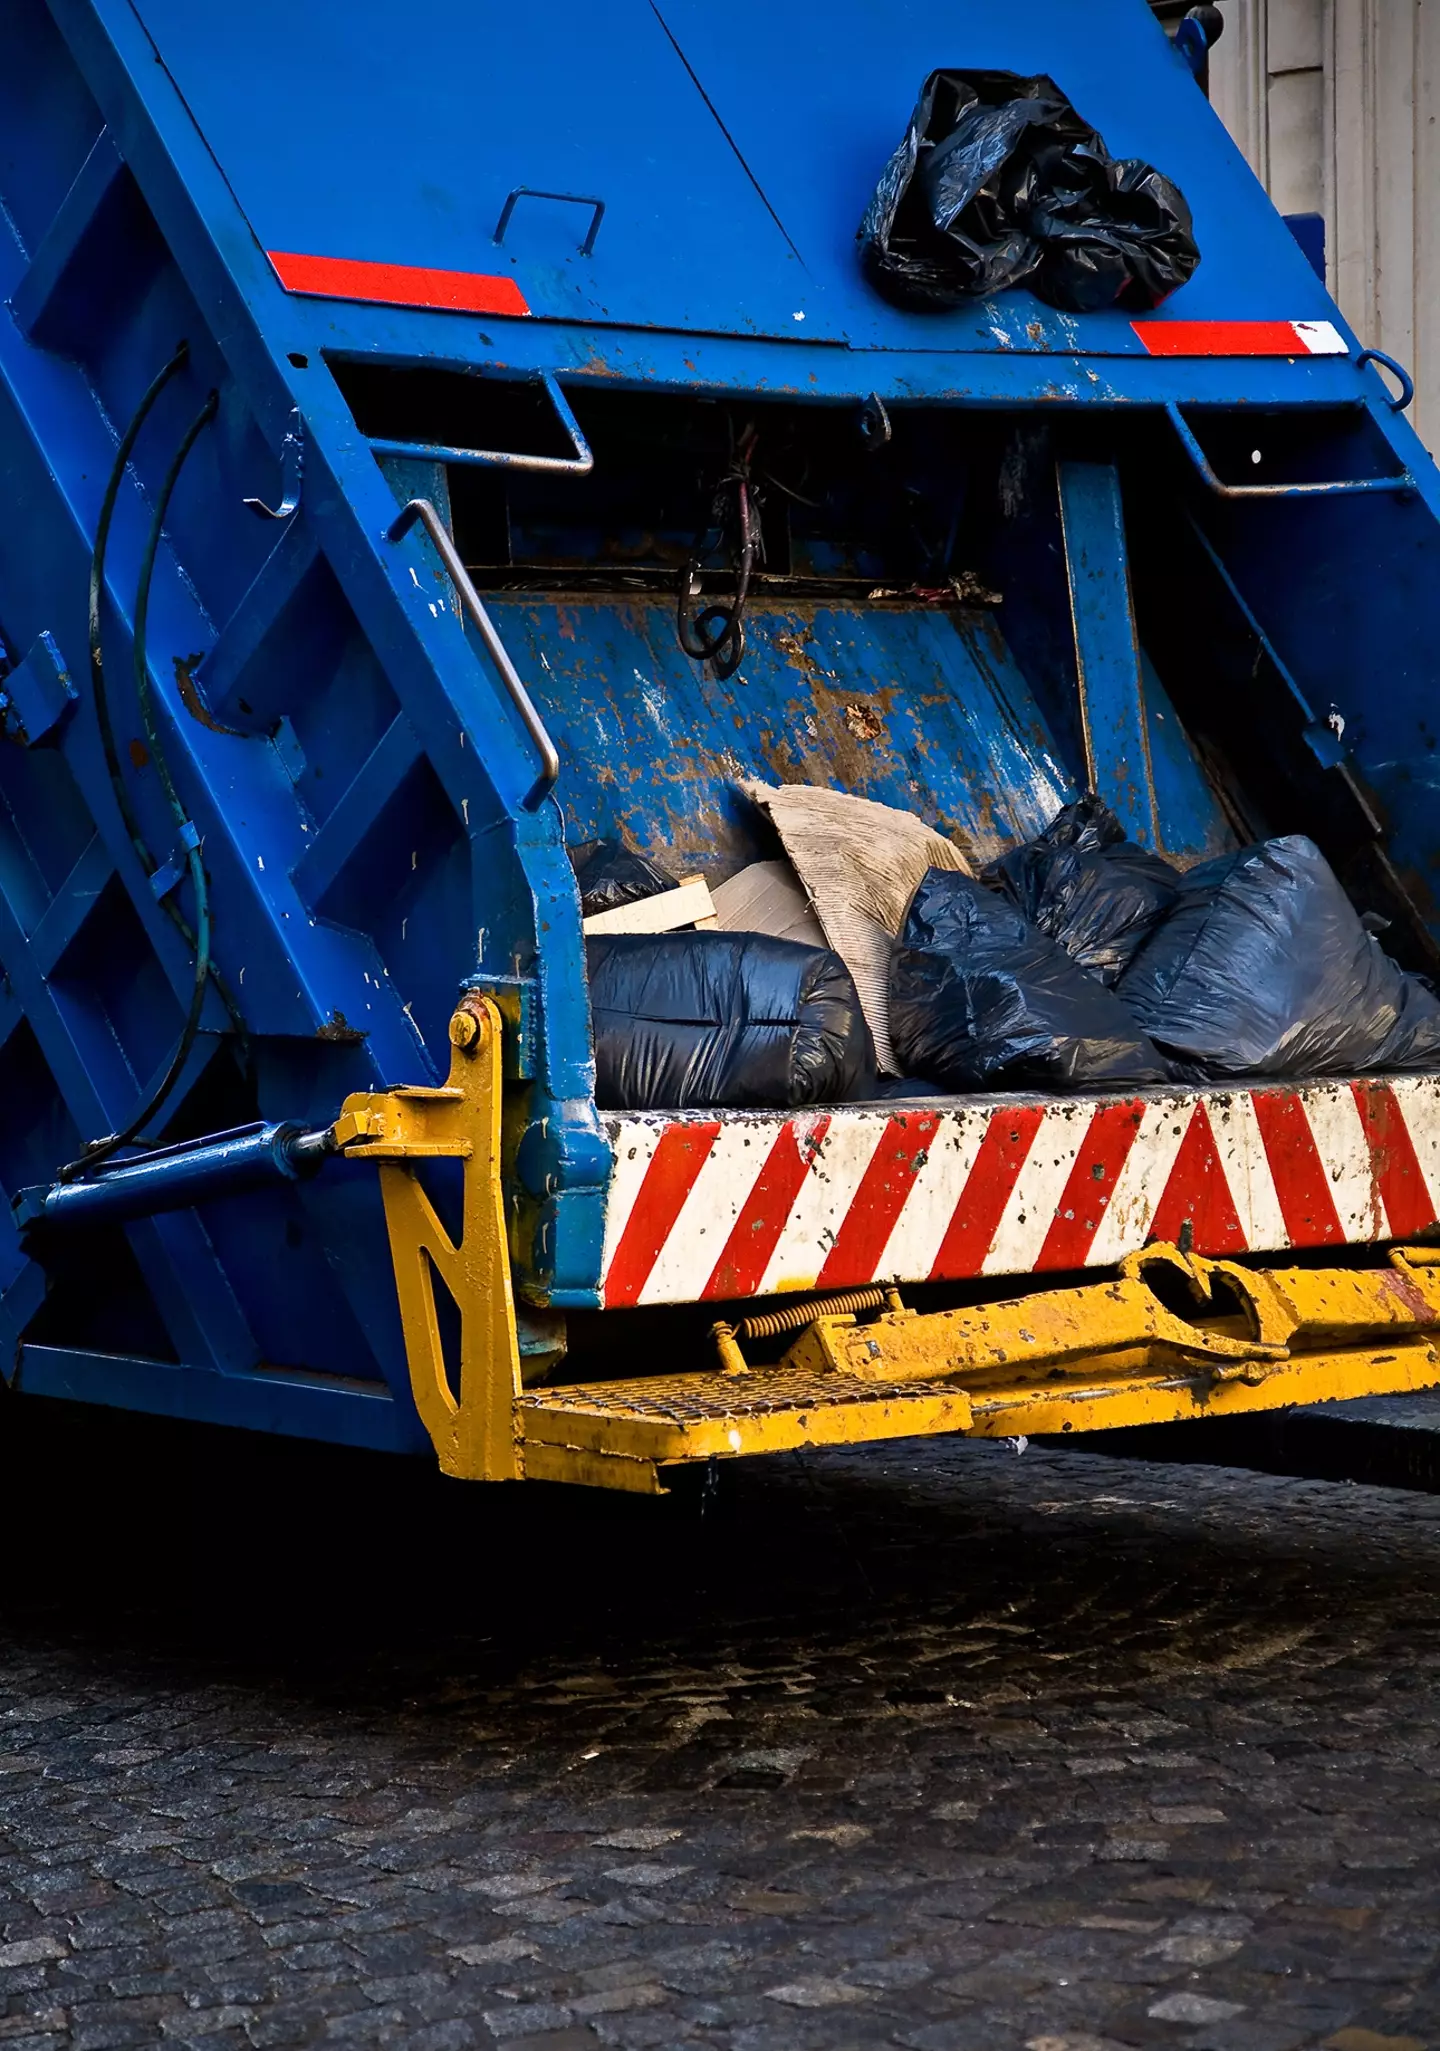 A woman was rescued from the back of a bin lorry after being compacted four times in there.